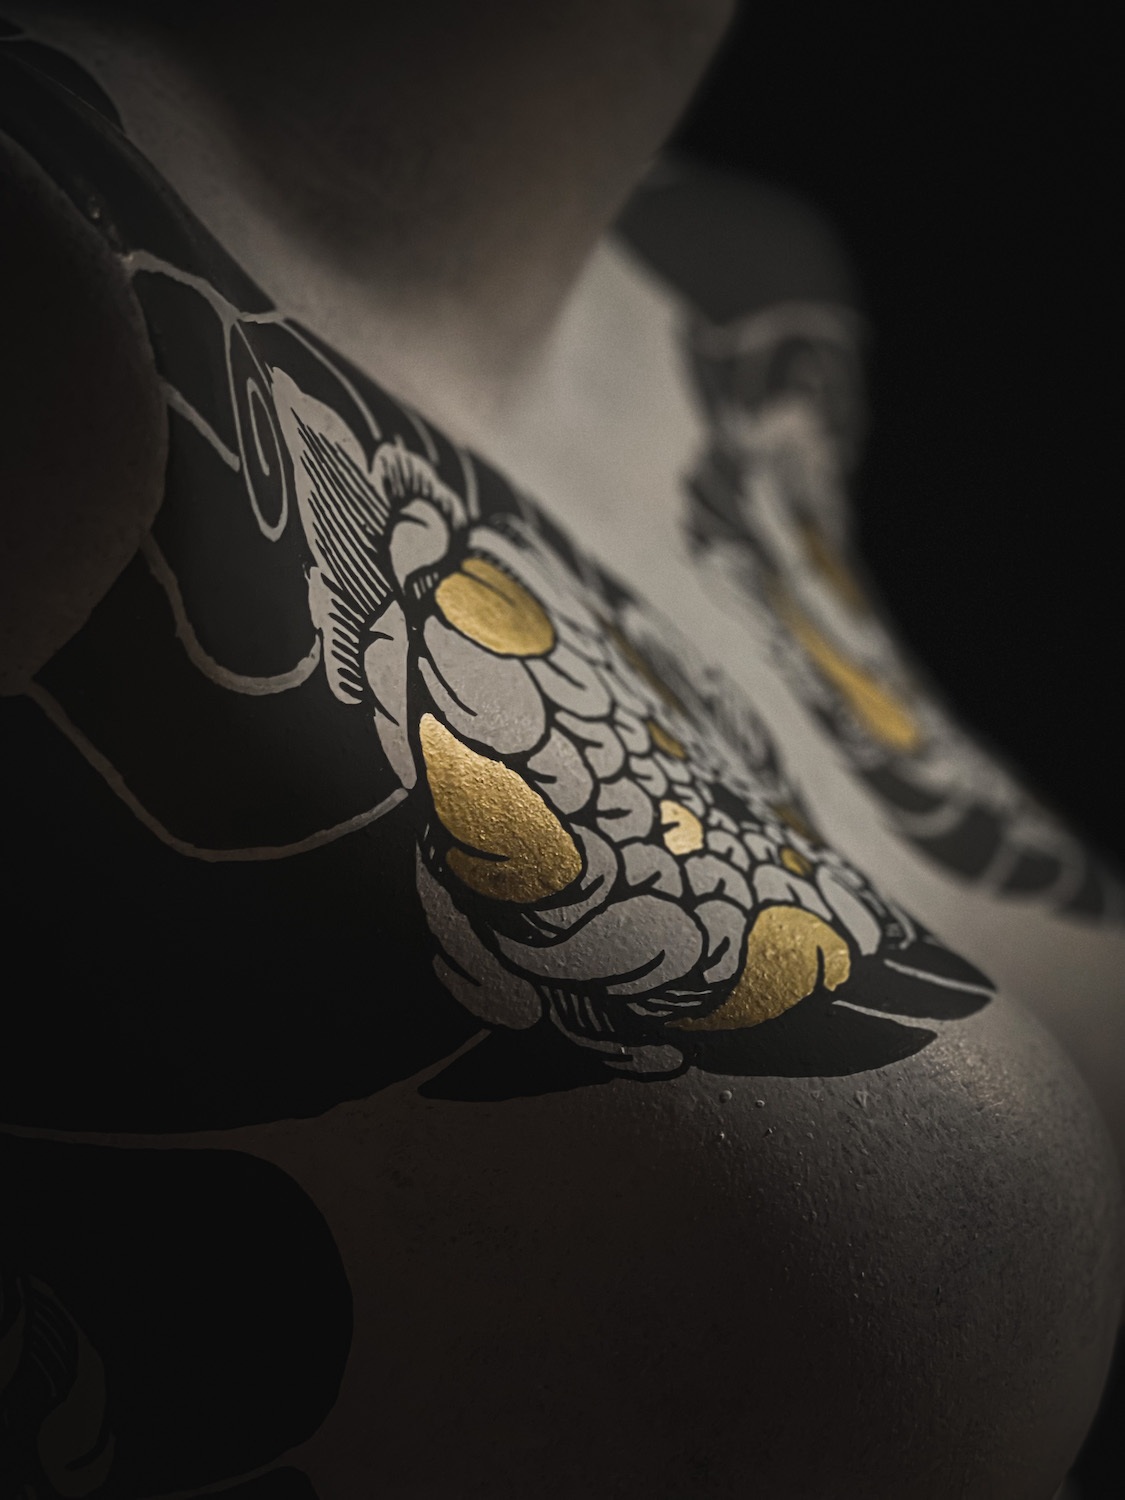 BROOKLYN YAKUZA] - Tattoos have a long historical meaning within